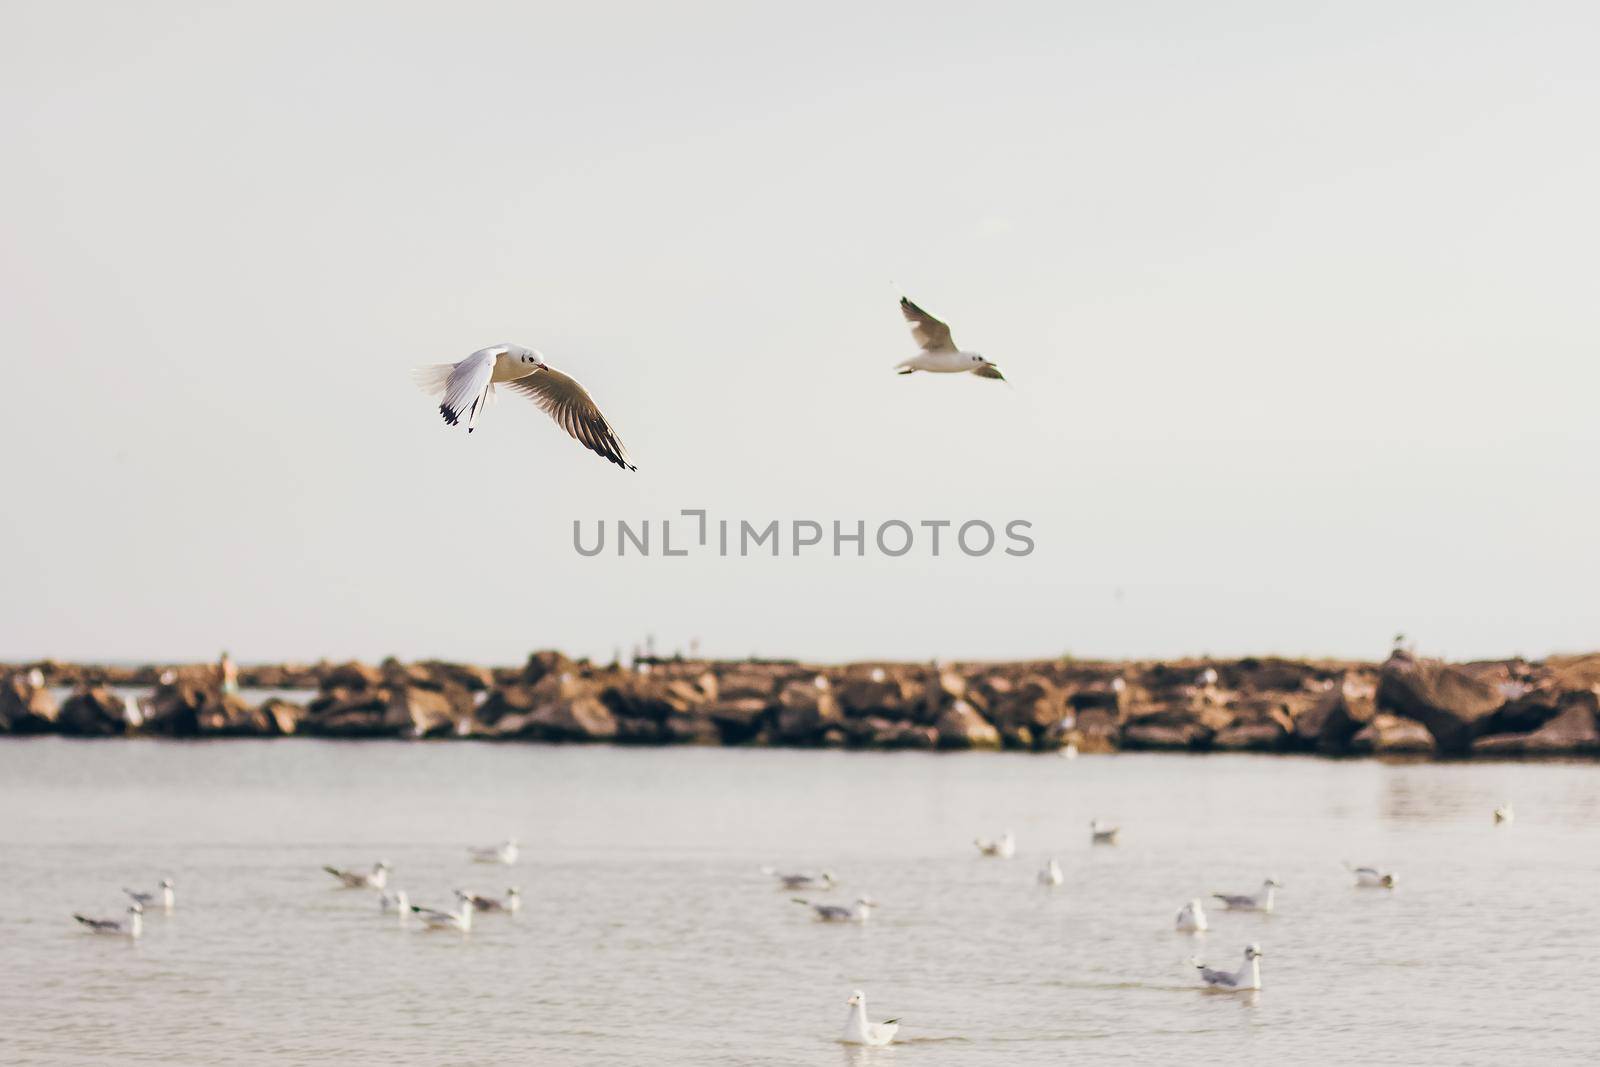 A group of wIld seagulls flying over the ocean or sea by mmp1206